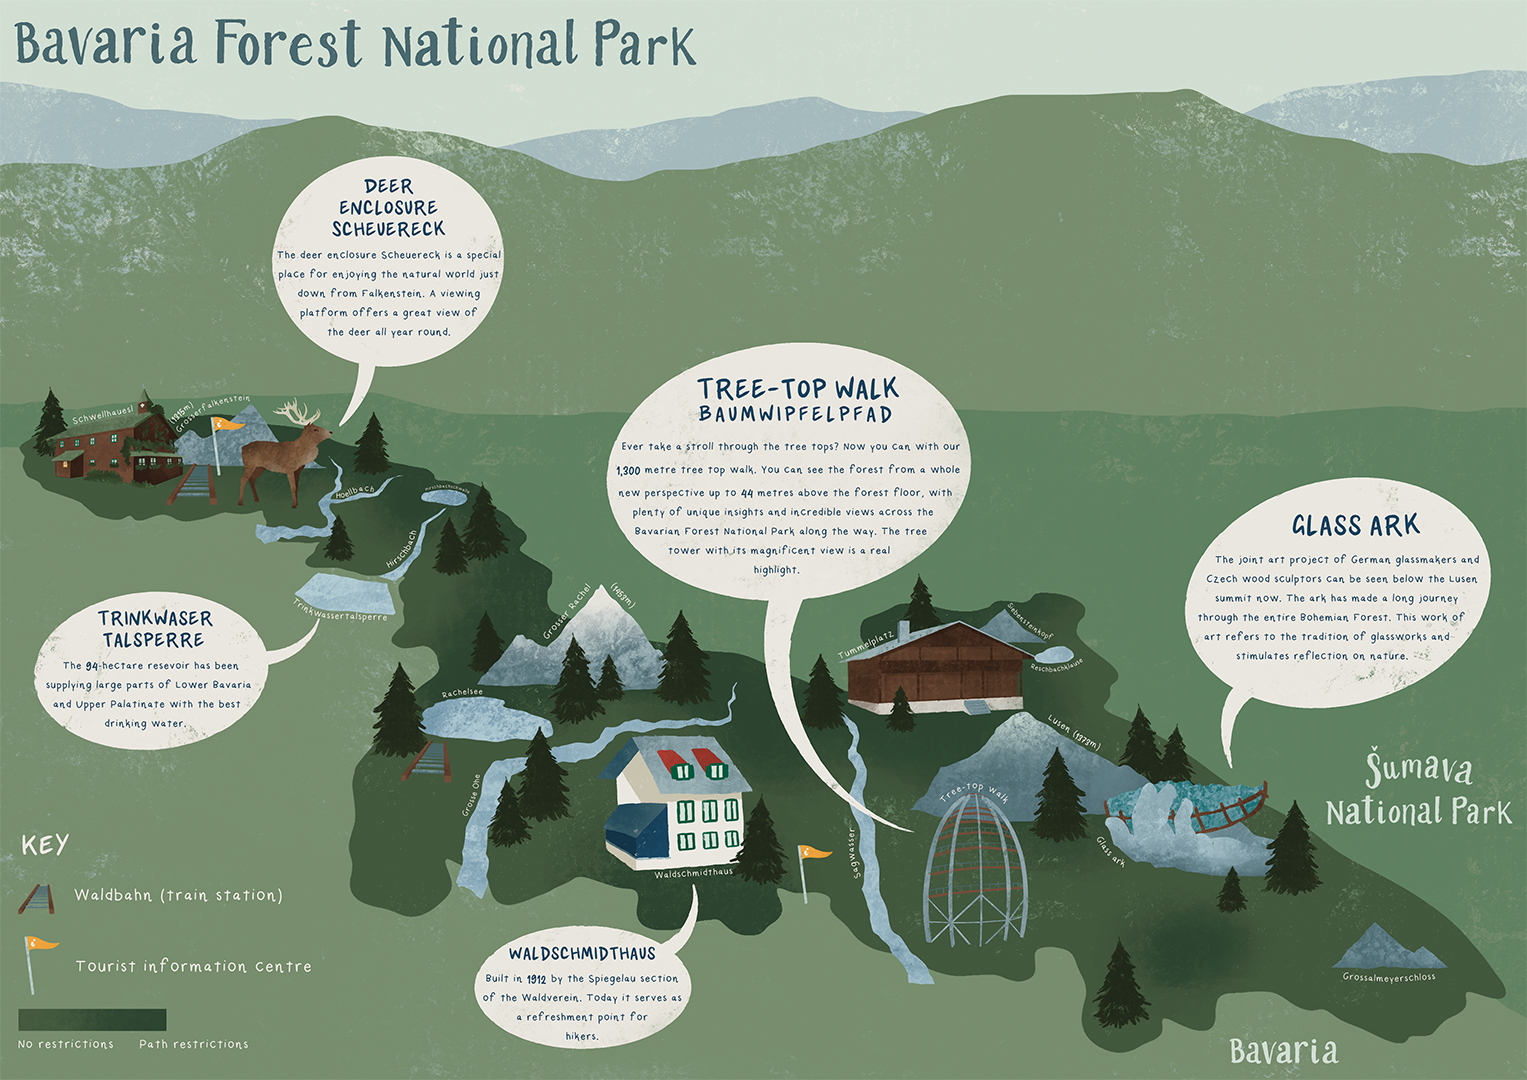 An illustrated map of Bavarian Forest National Park.